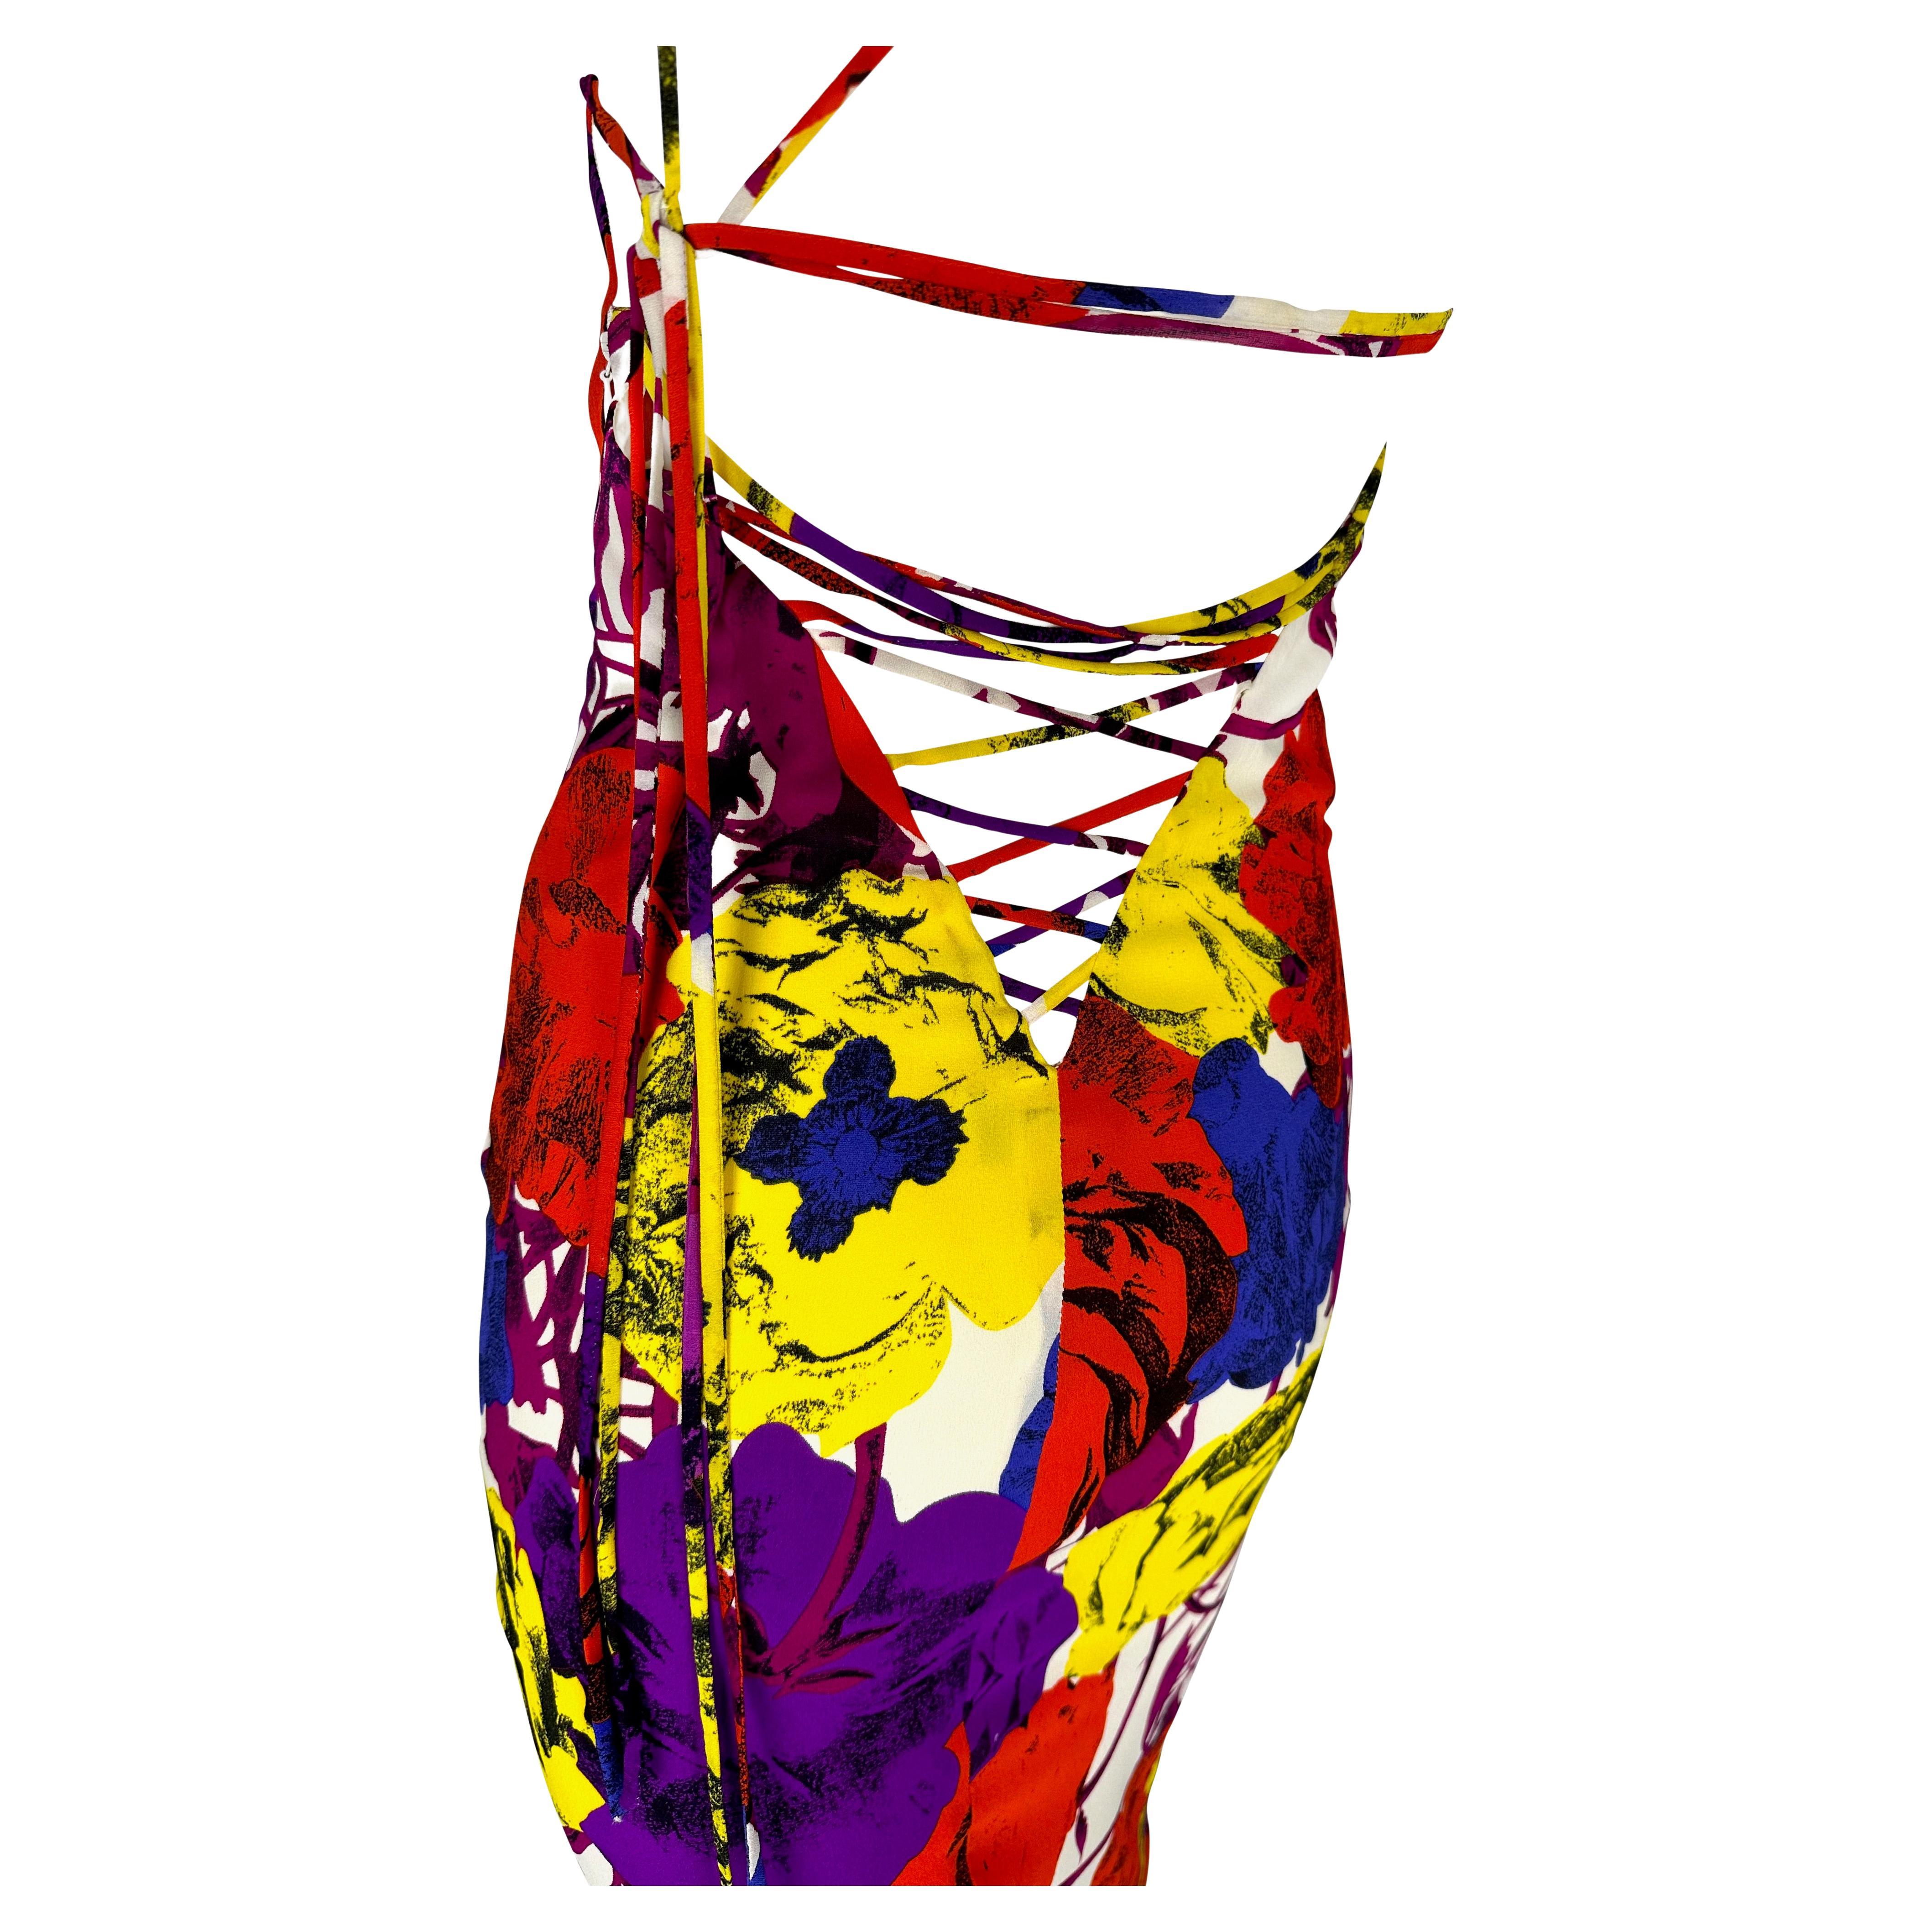 S/S 2002 Gianni Versace by Donatella Pop Art Floral Print Lace-Up Backless Dress For Sale 2